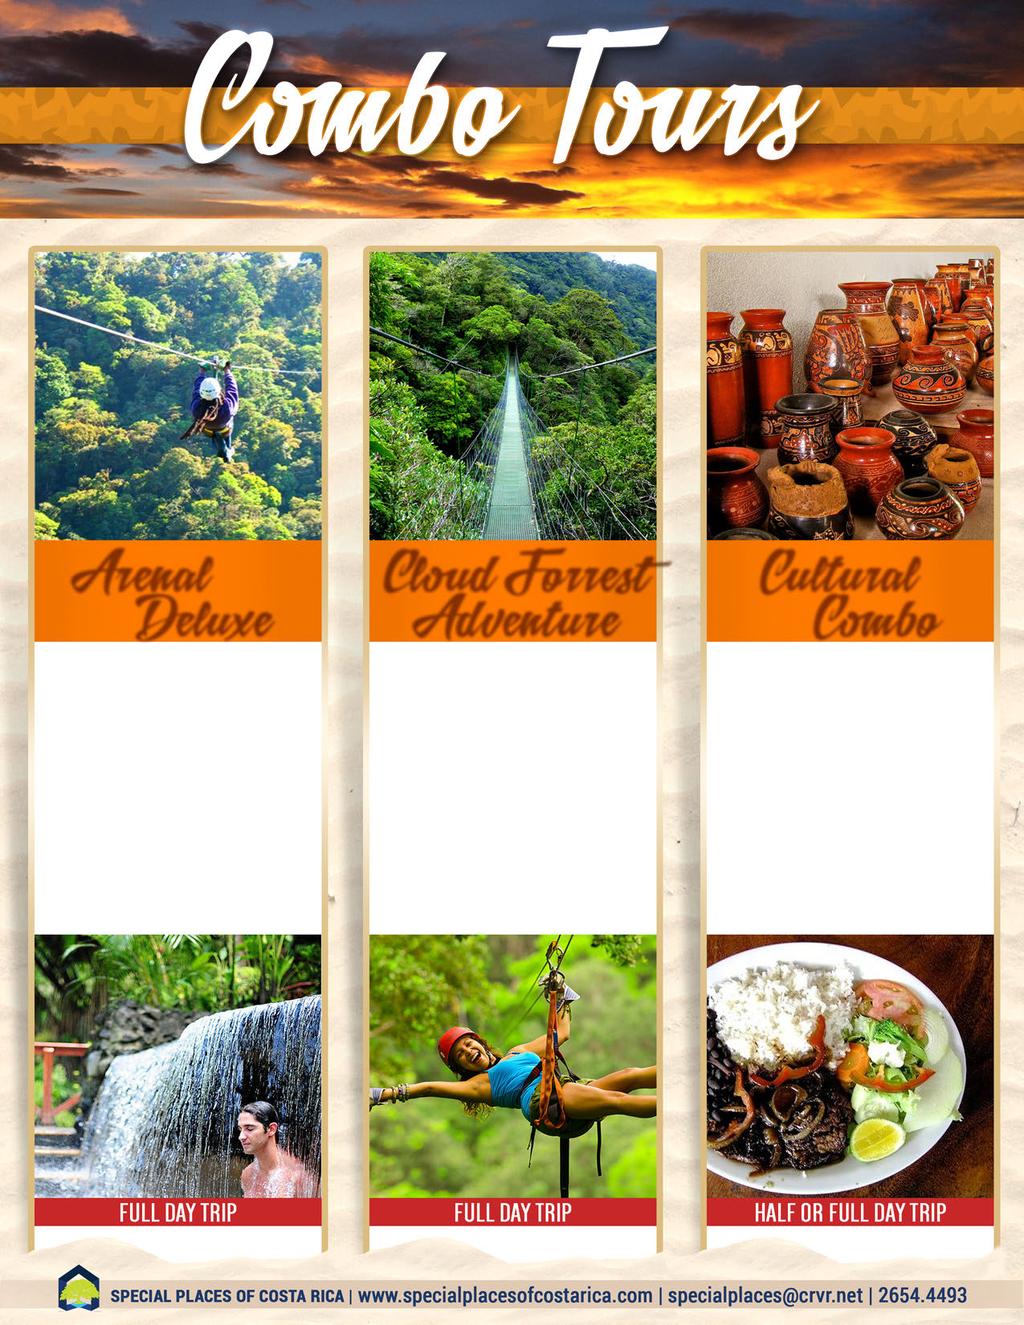 Visit Costa Rica s most famous volcano, expierence Costa Rica s higest, longest and fasted zipline and relax in the country's most luxurious volcanic hot springs!